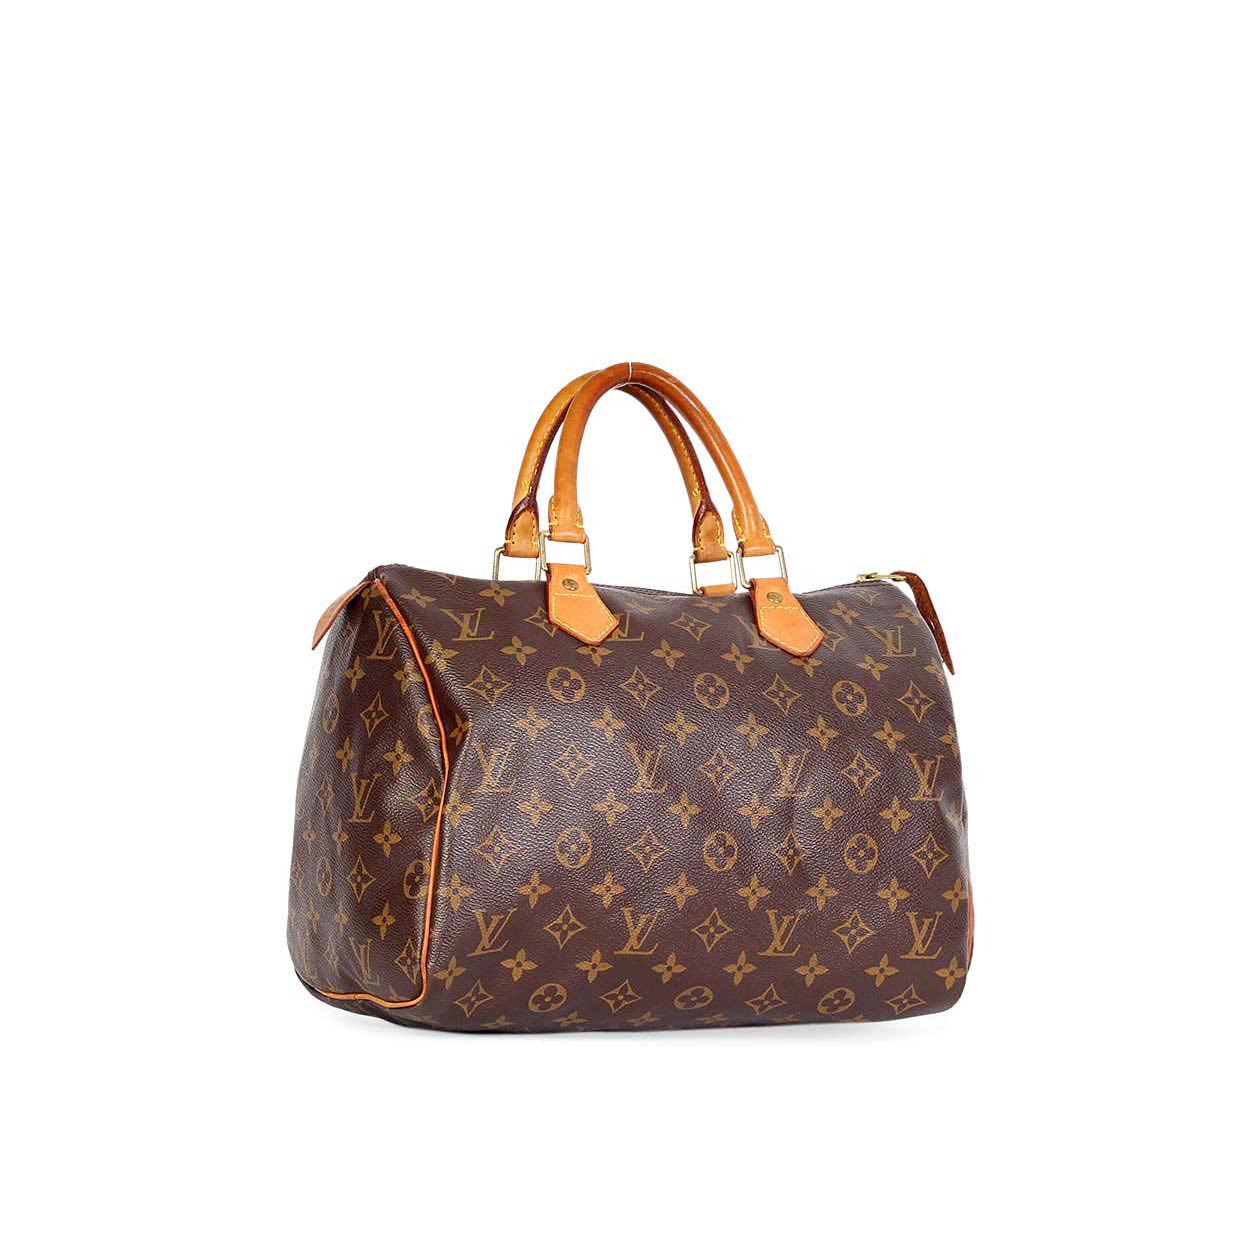 Louis Vuitton Monogram Speedy | Confederated Tribes of the Umatilla Indian Reservation